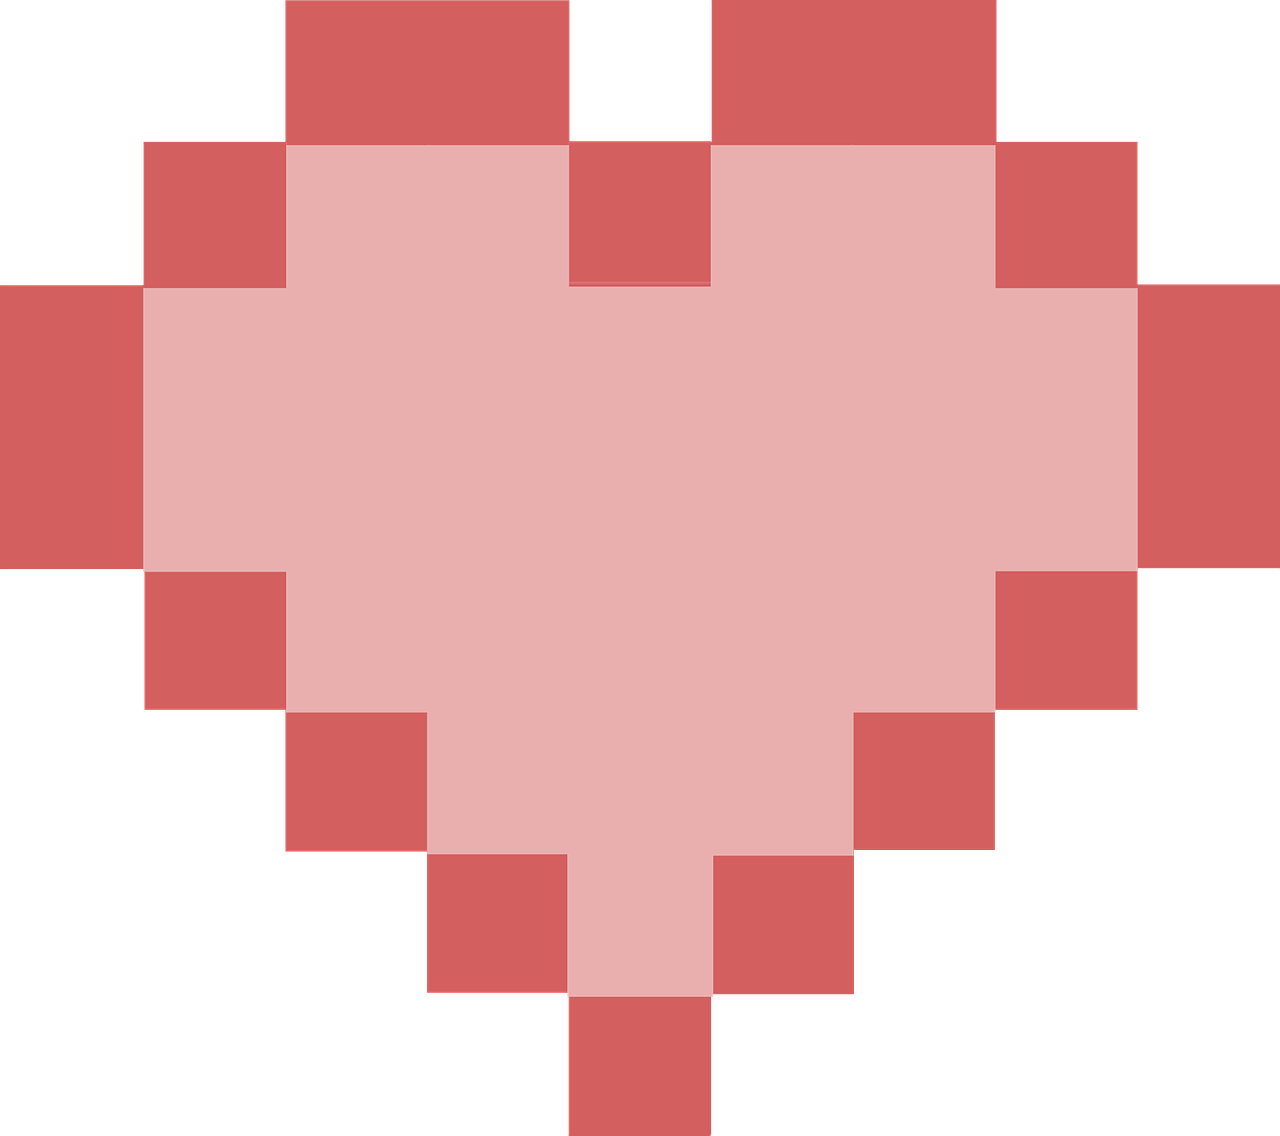 Online games love heart pixel connect Royalty Free Vector